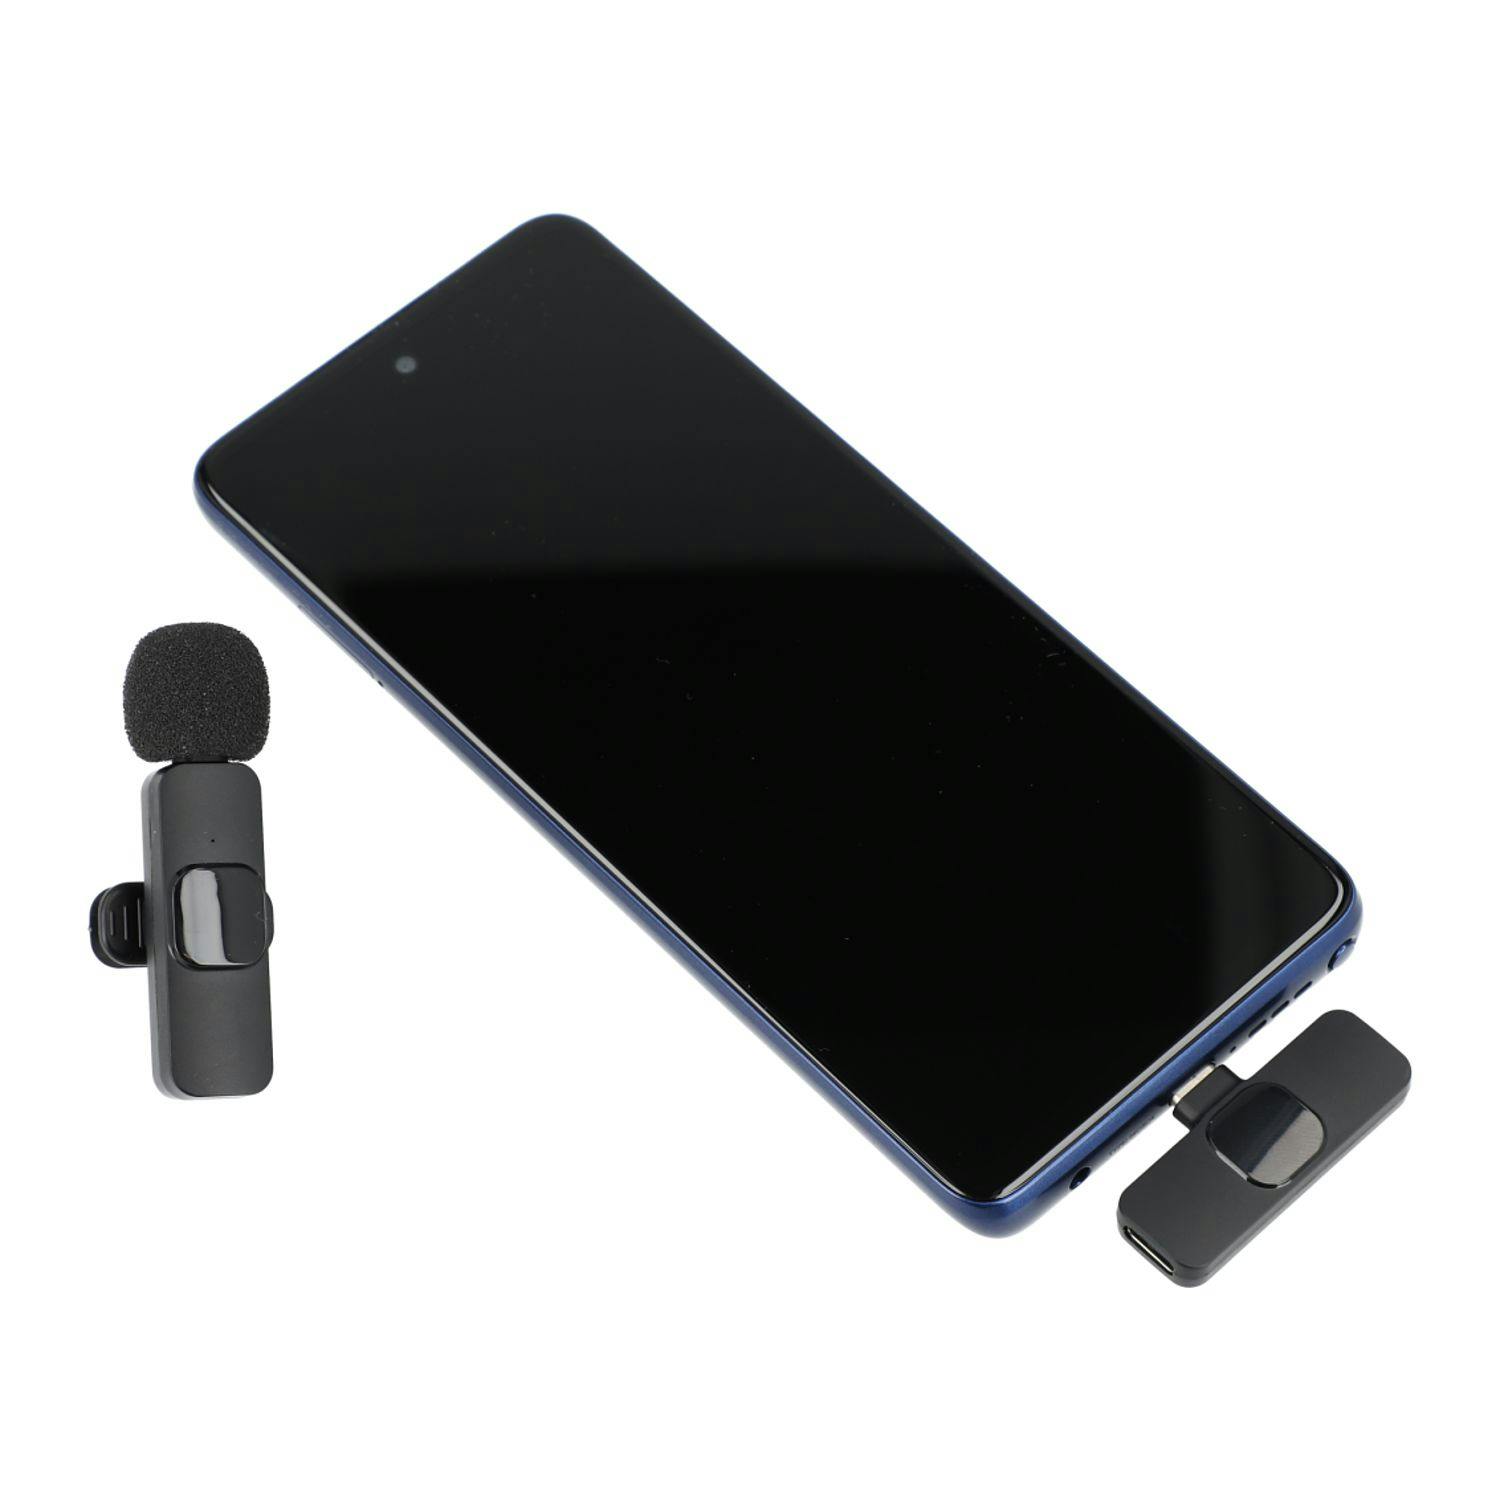 Duo Talk Wireless Microphone - additional Image 2